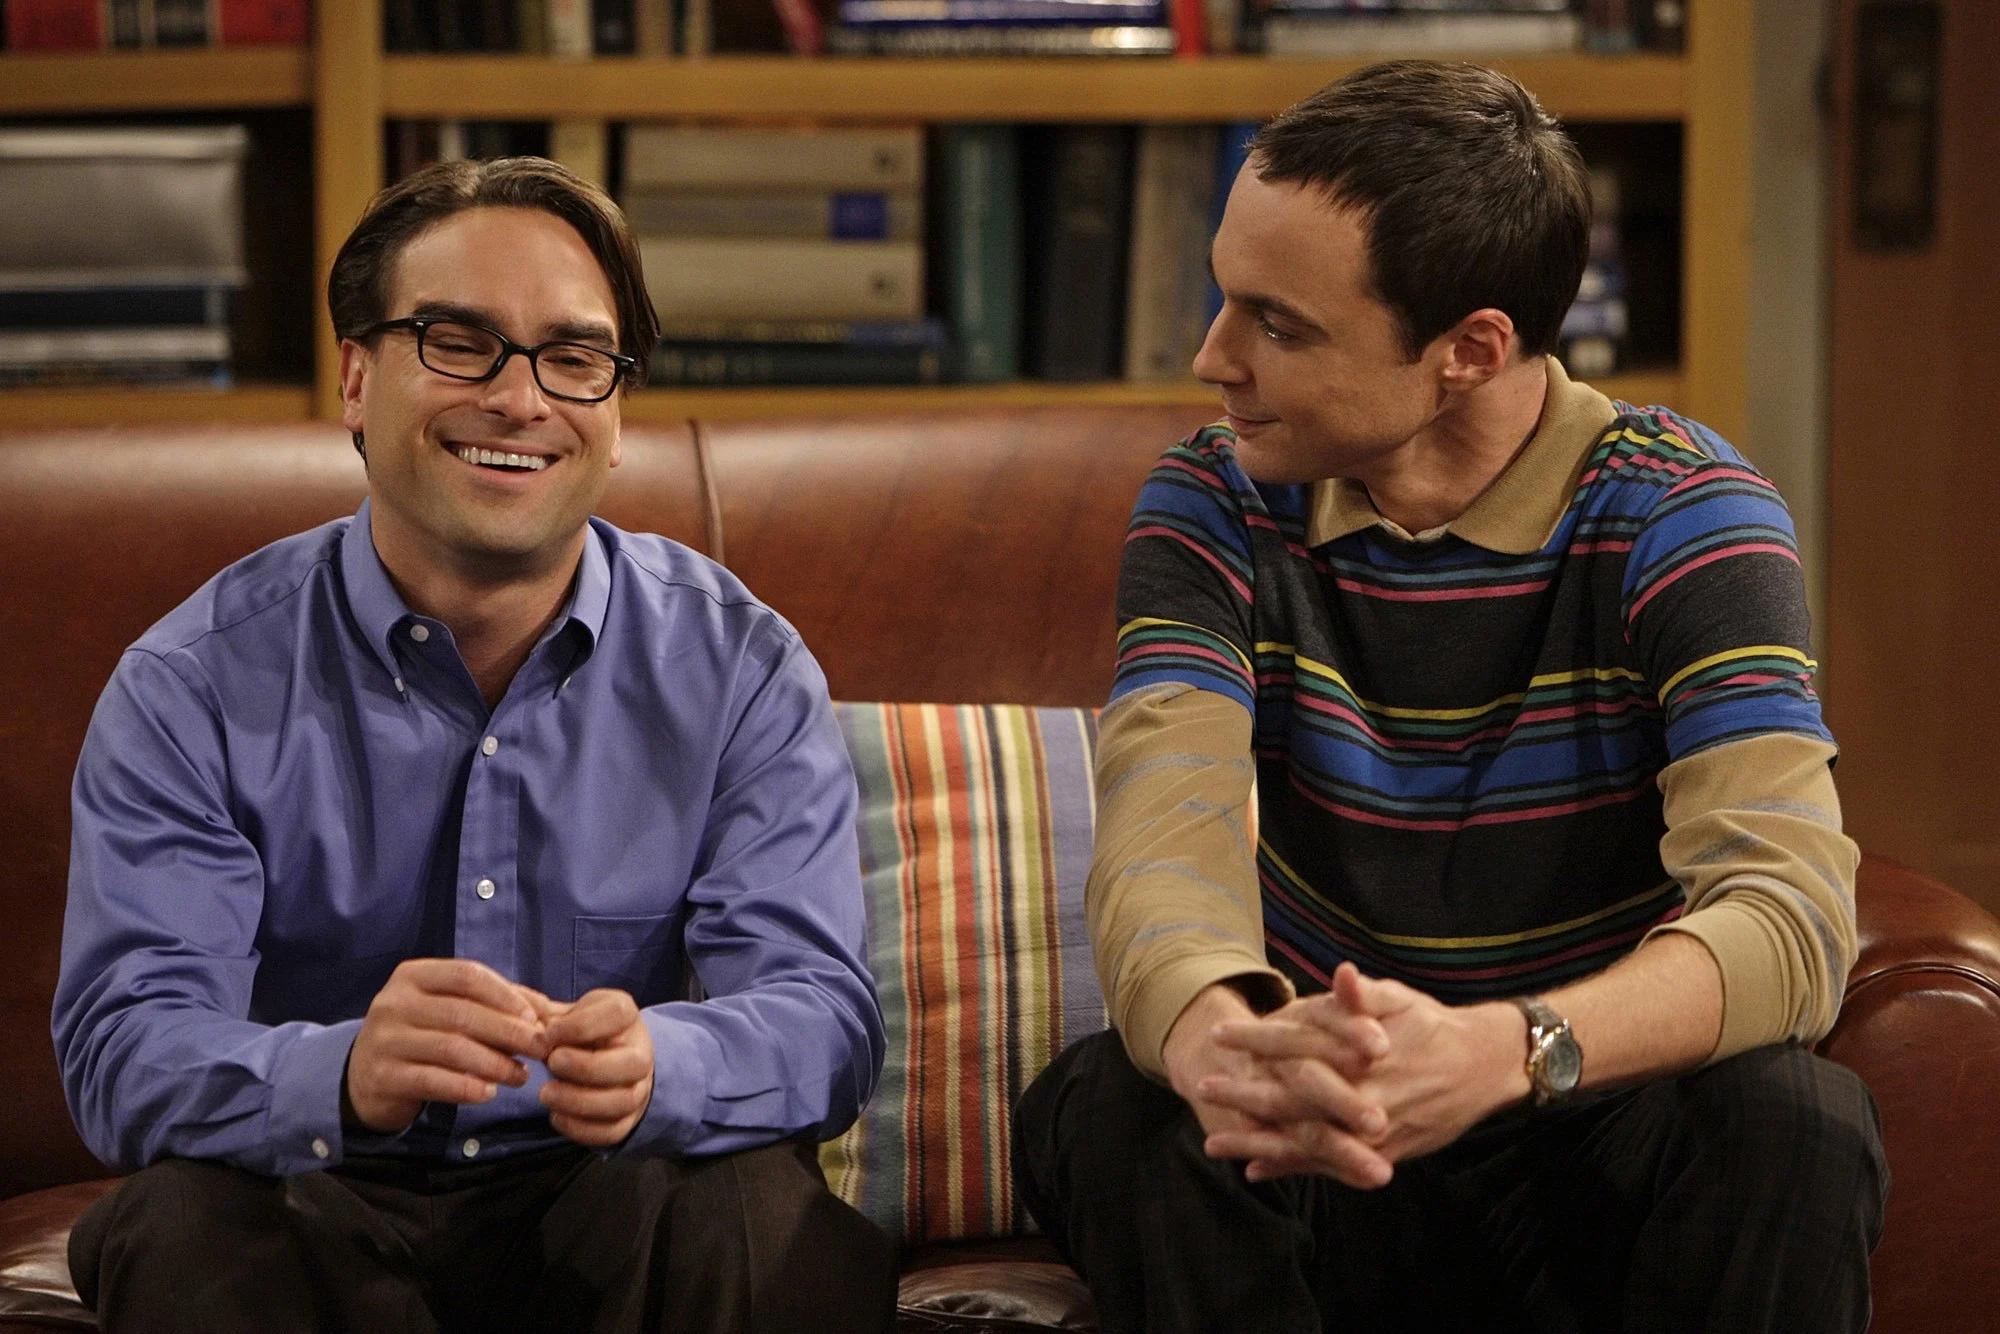 The Big Bang Theory (Sheldon and Leonard) - Scientific minds, unbreakable bond! 